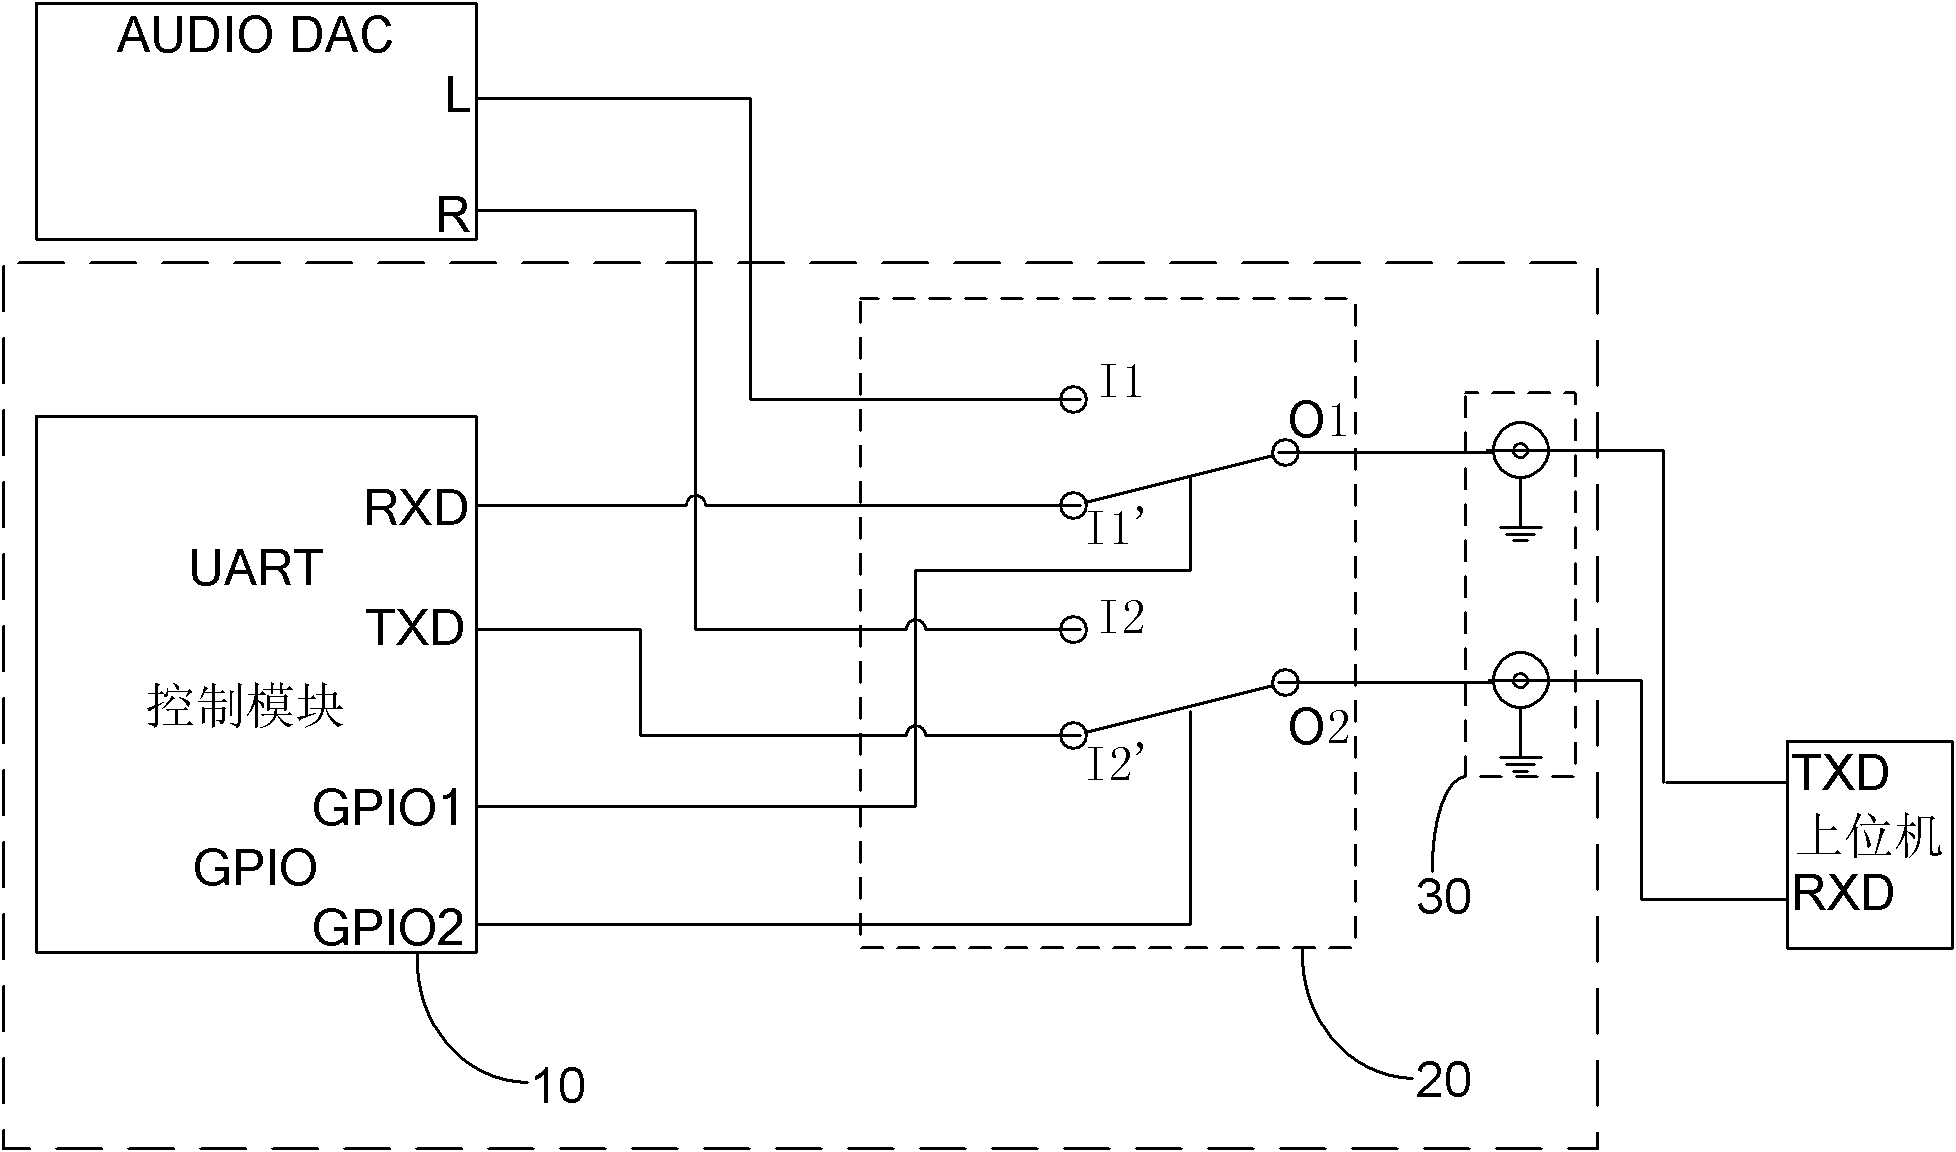 Debugging system with analog audio output device